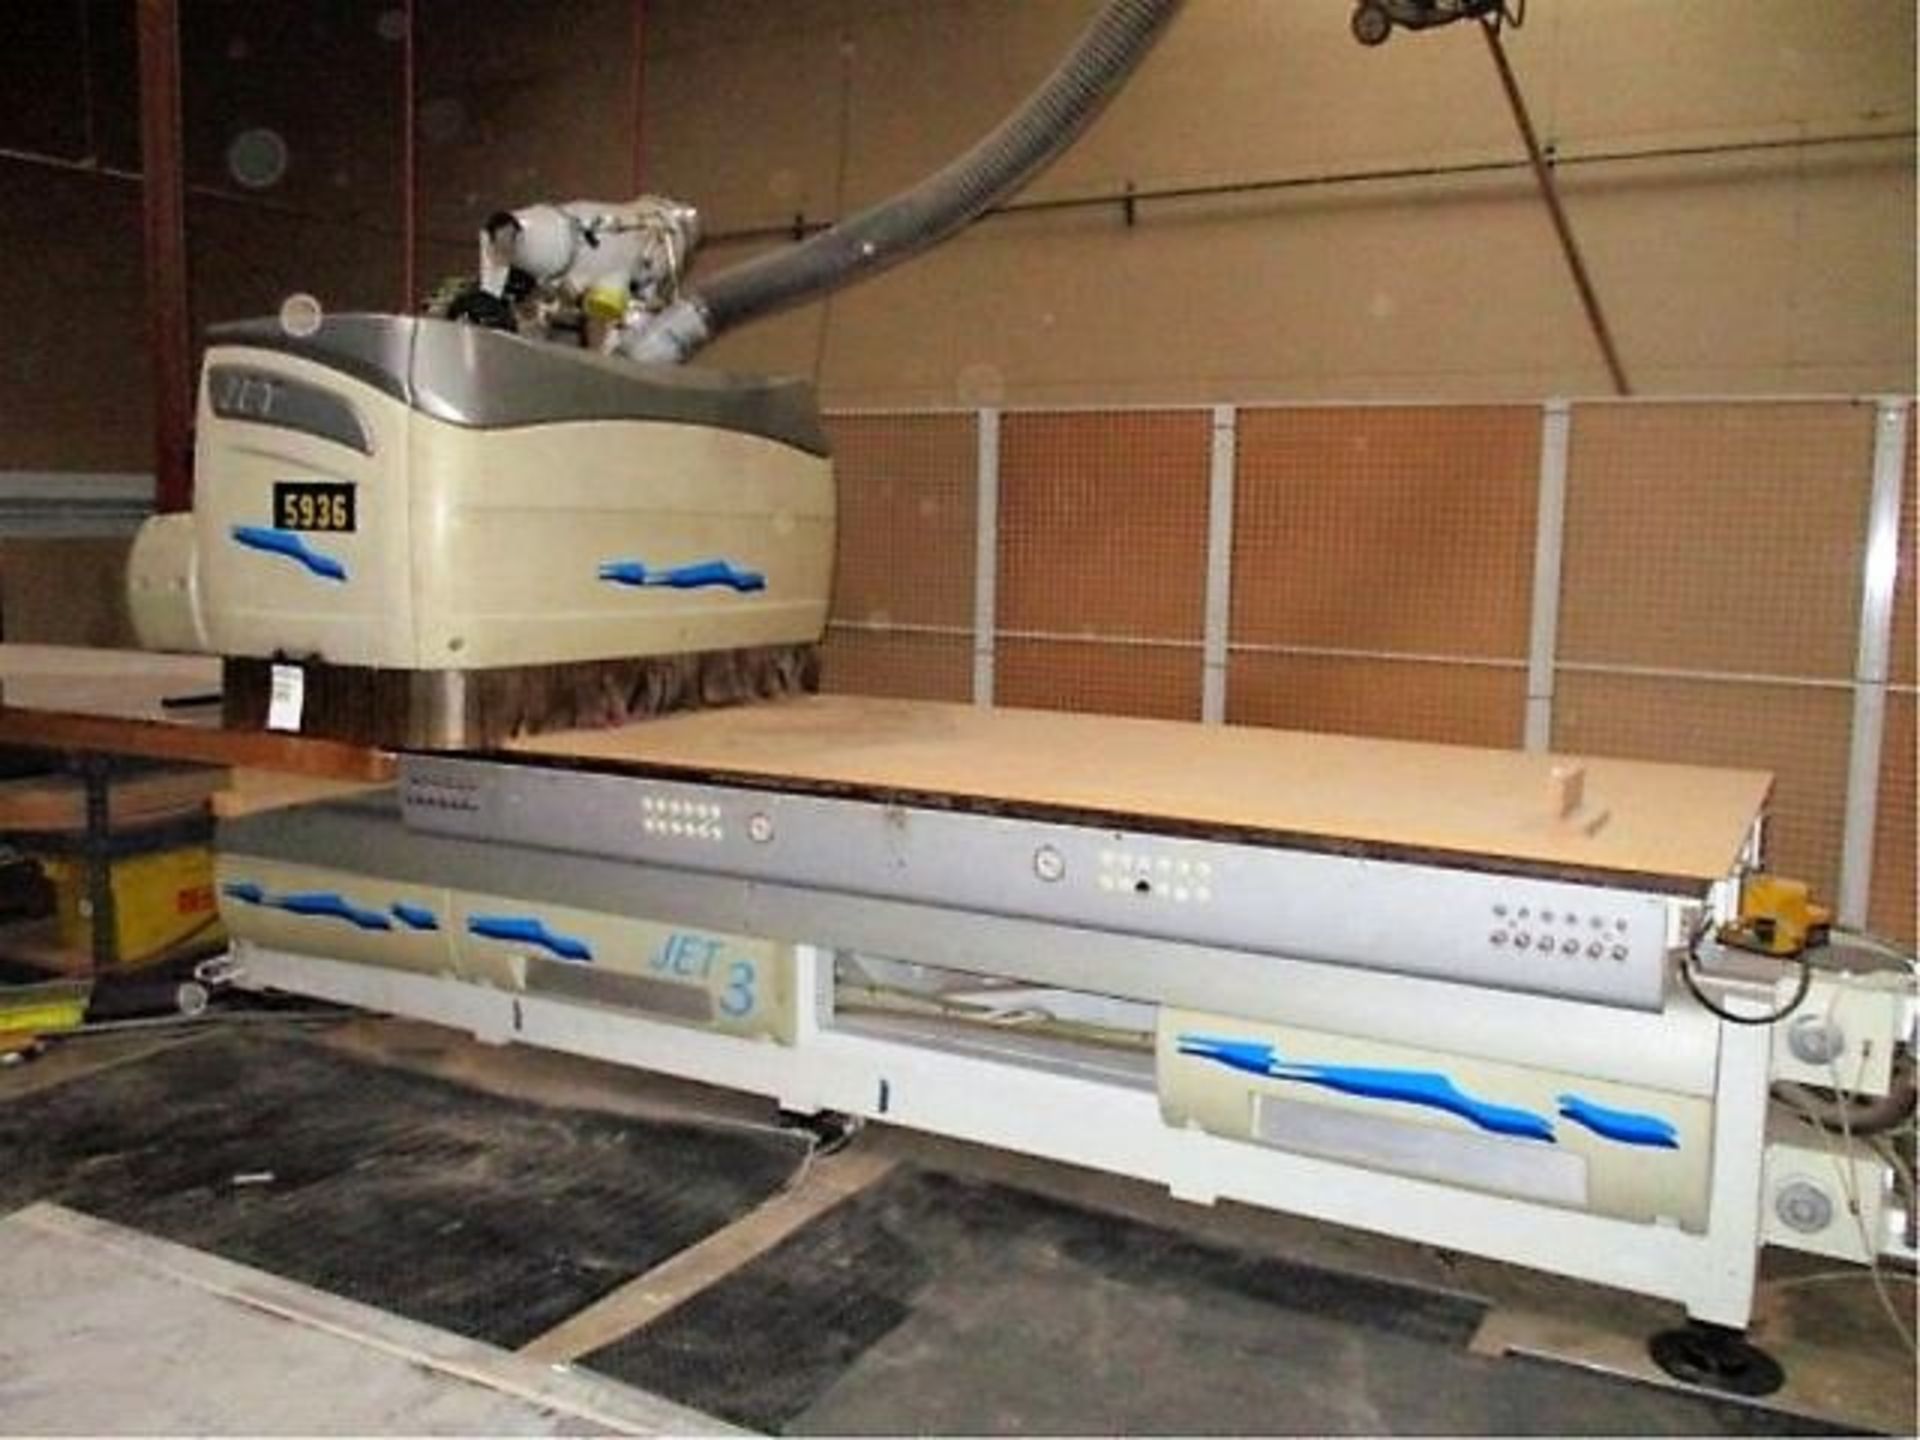 Busalleto Jet 3 RT CNC Router with 5'x12' Table, S/N 5715, New 2003 - Bild 3 aus 8